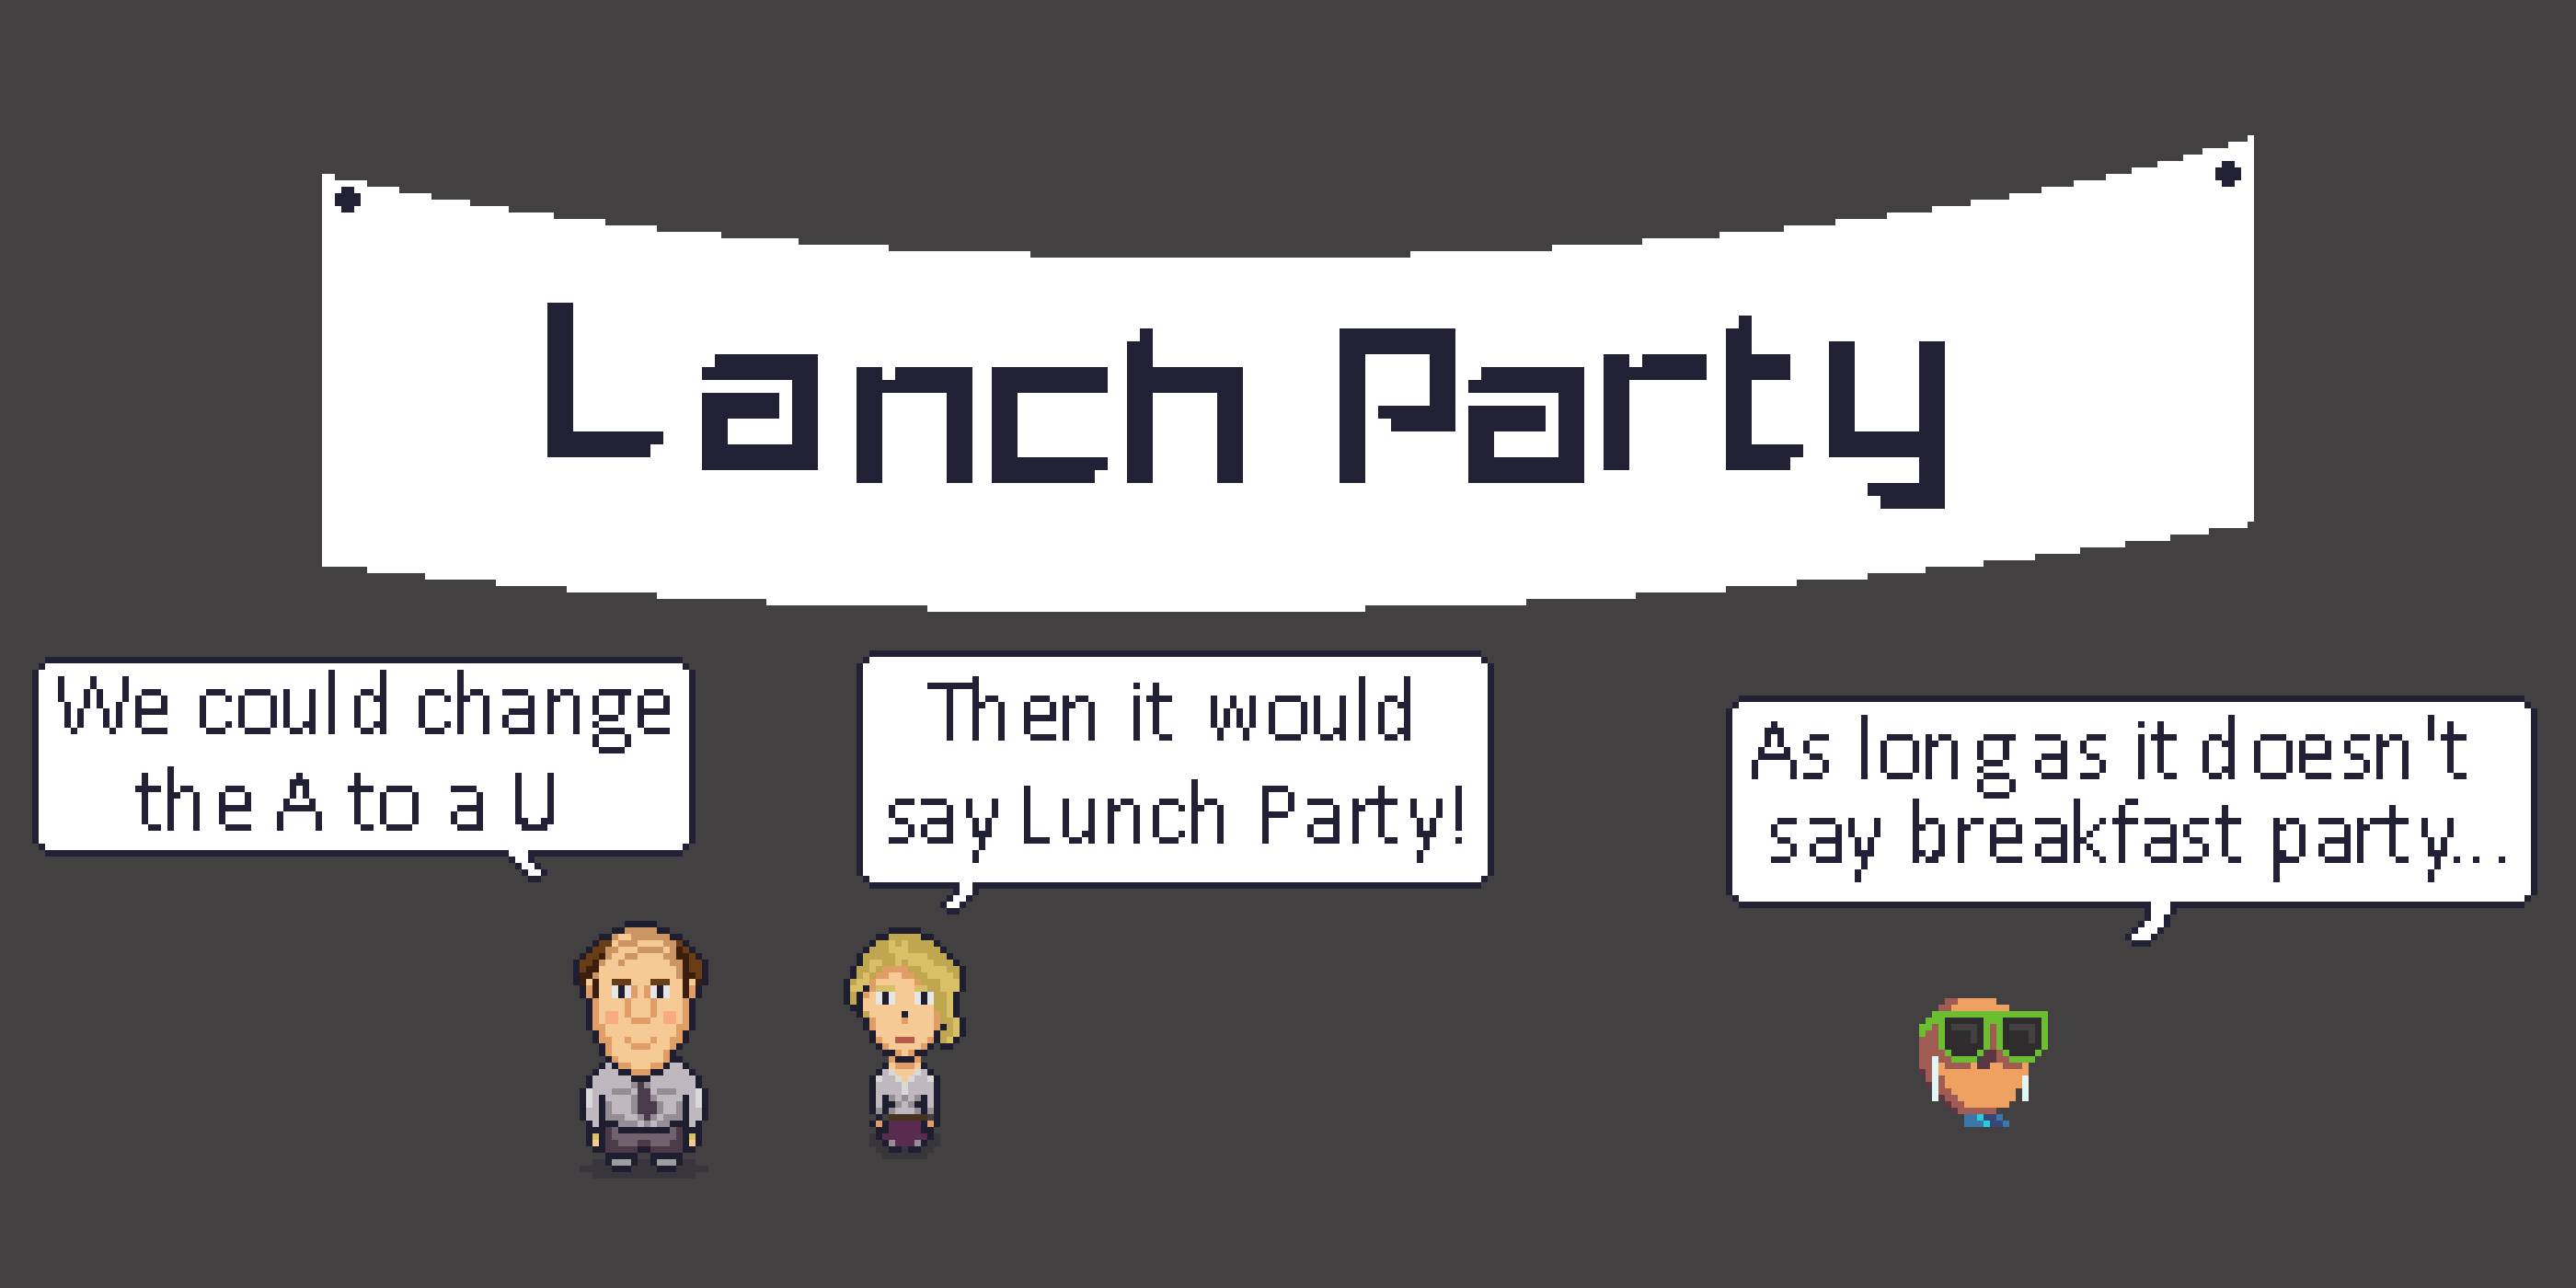 lanch partyx7